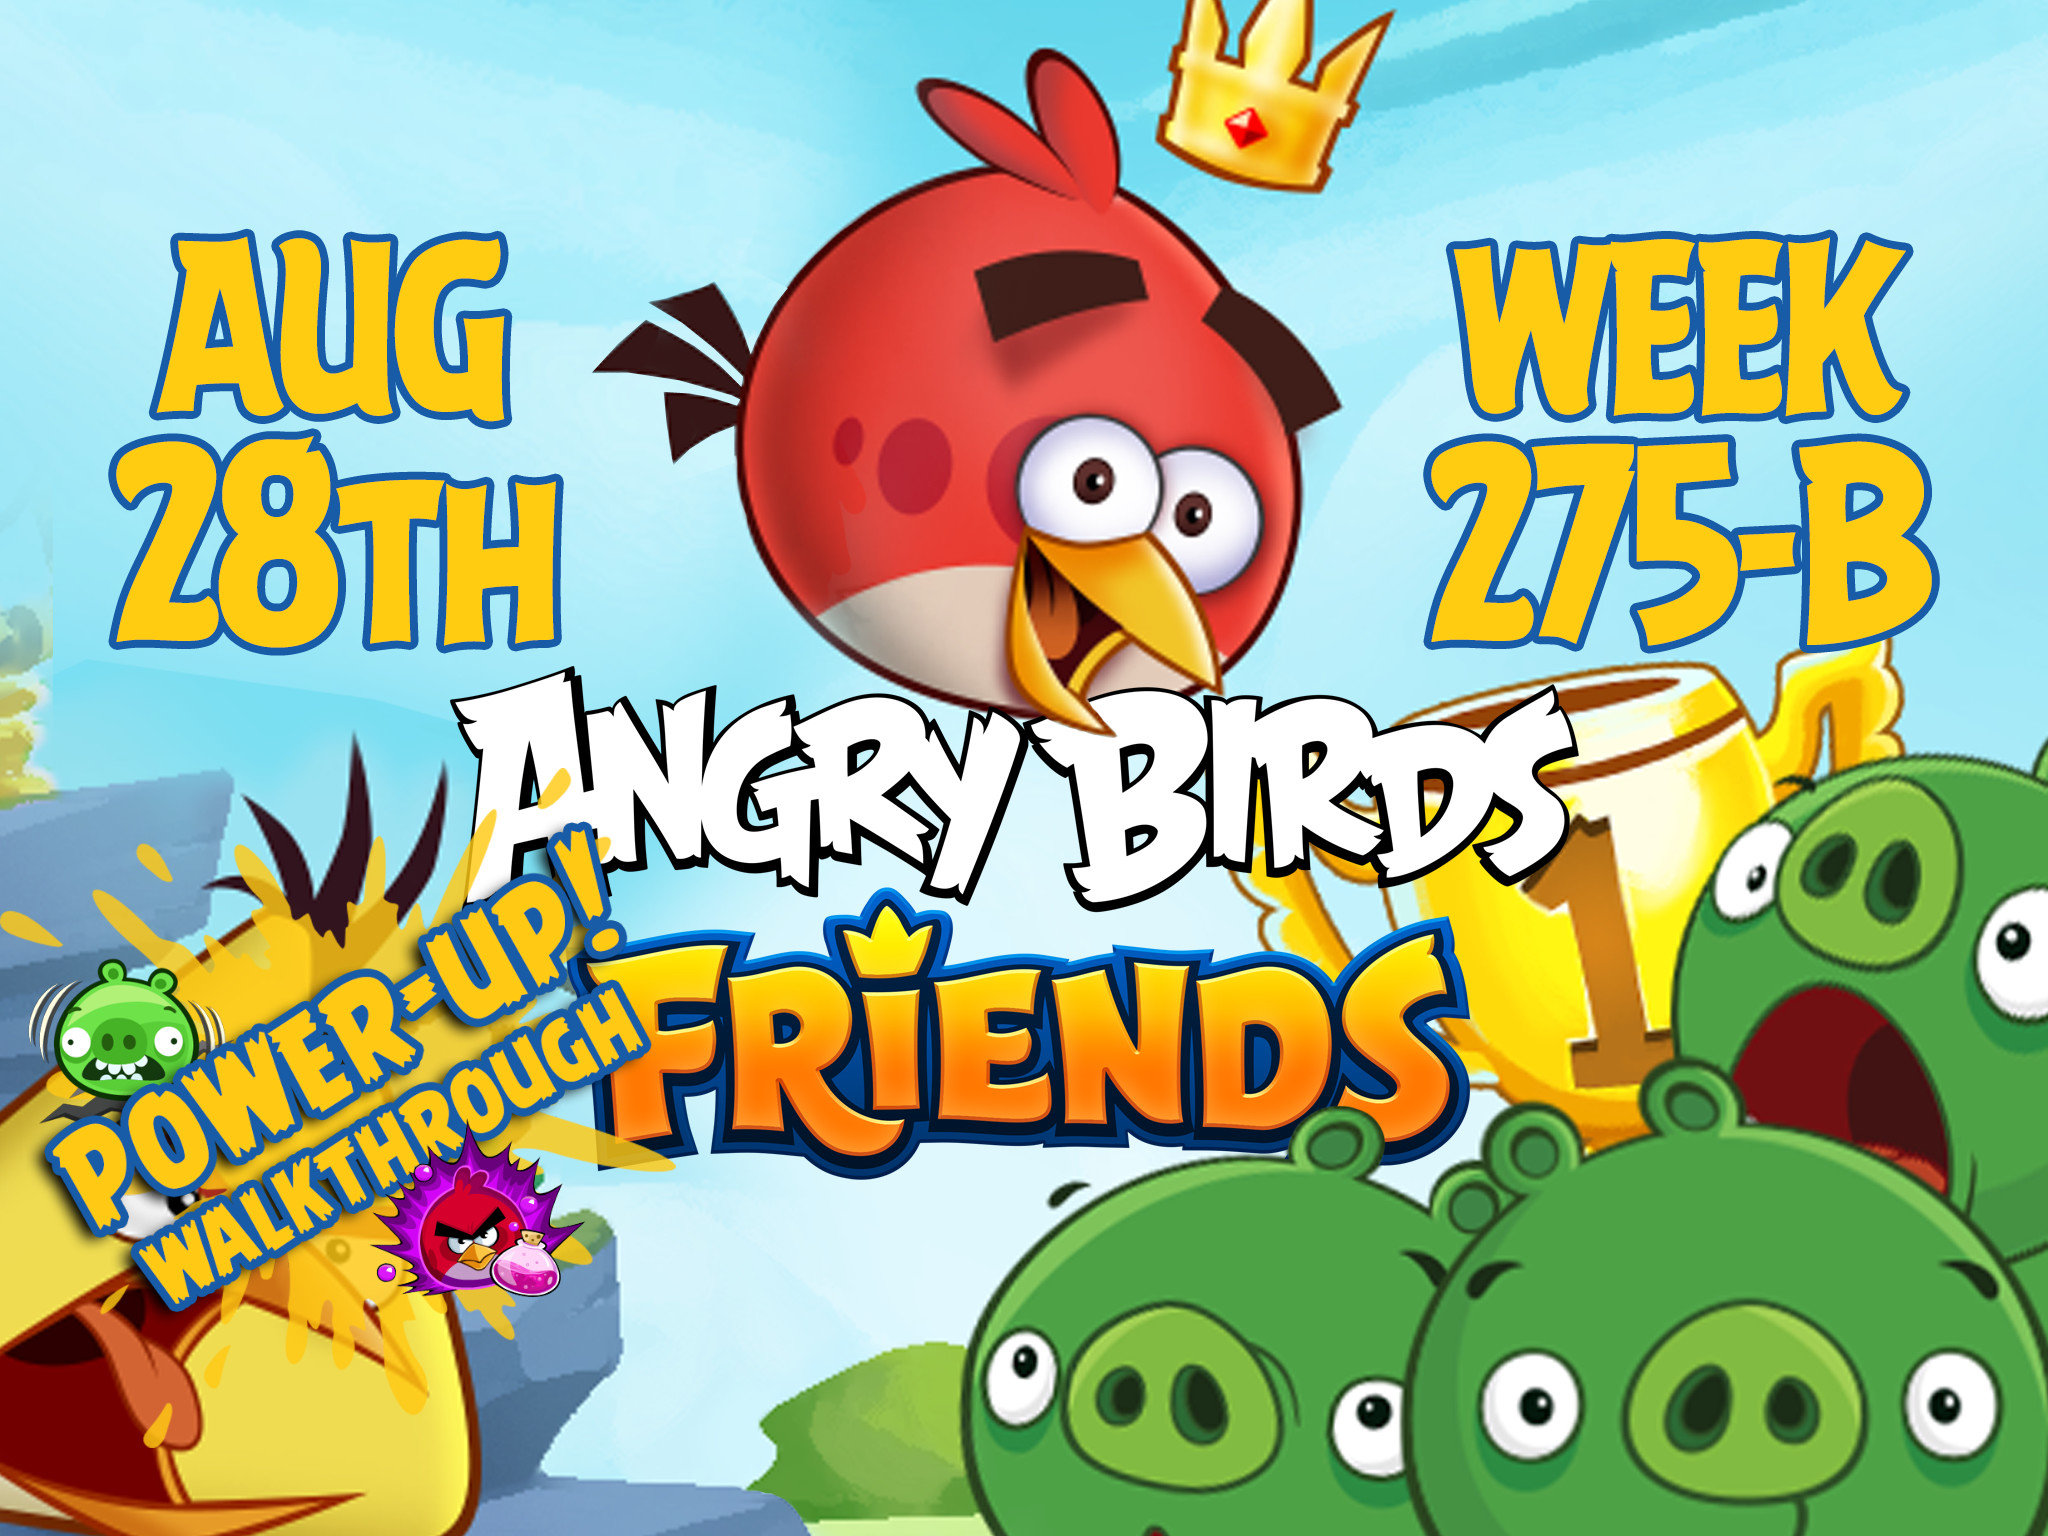 Angry Birds Friends Tournament Week 275-B Feature Image PU